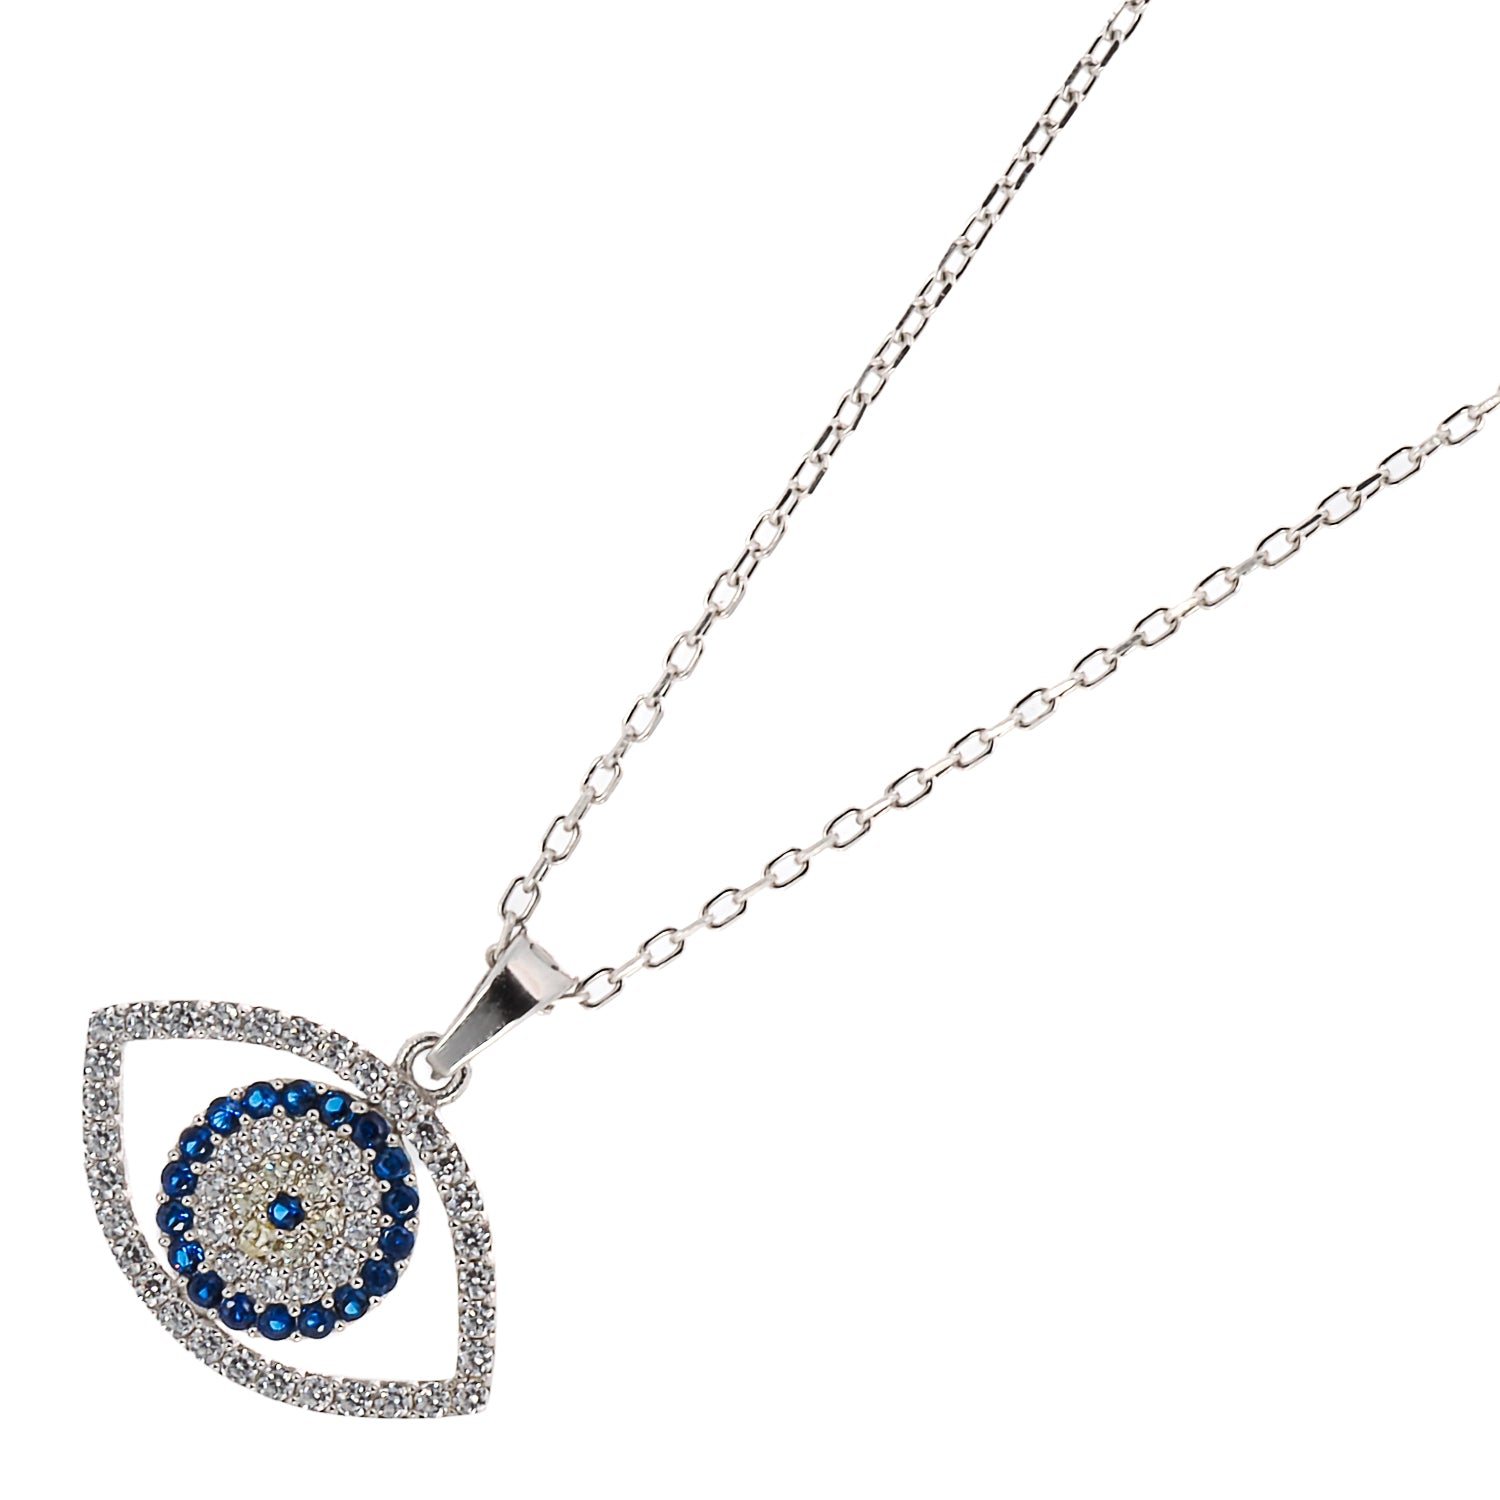 The Sparkly Evil Eye Necklace, a harmonious blend of sophistication and glamour.